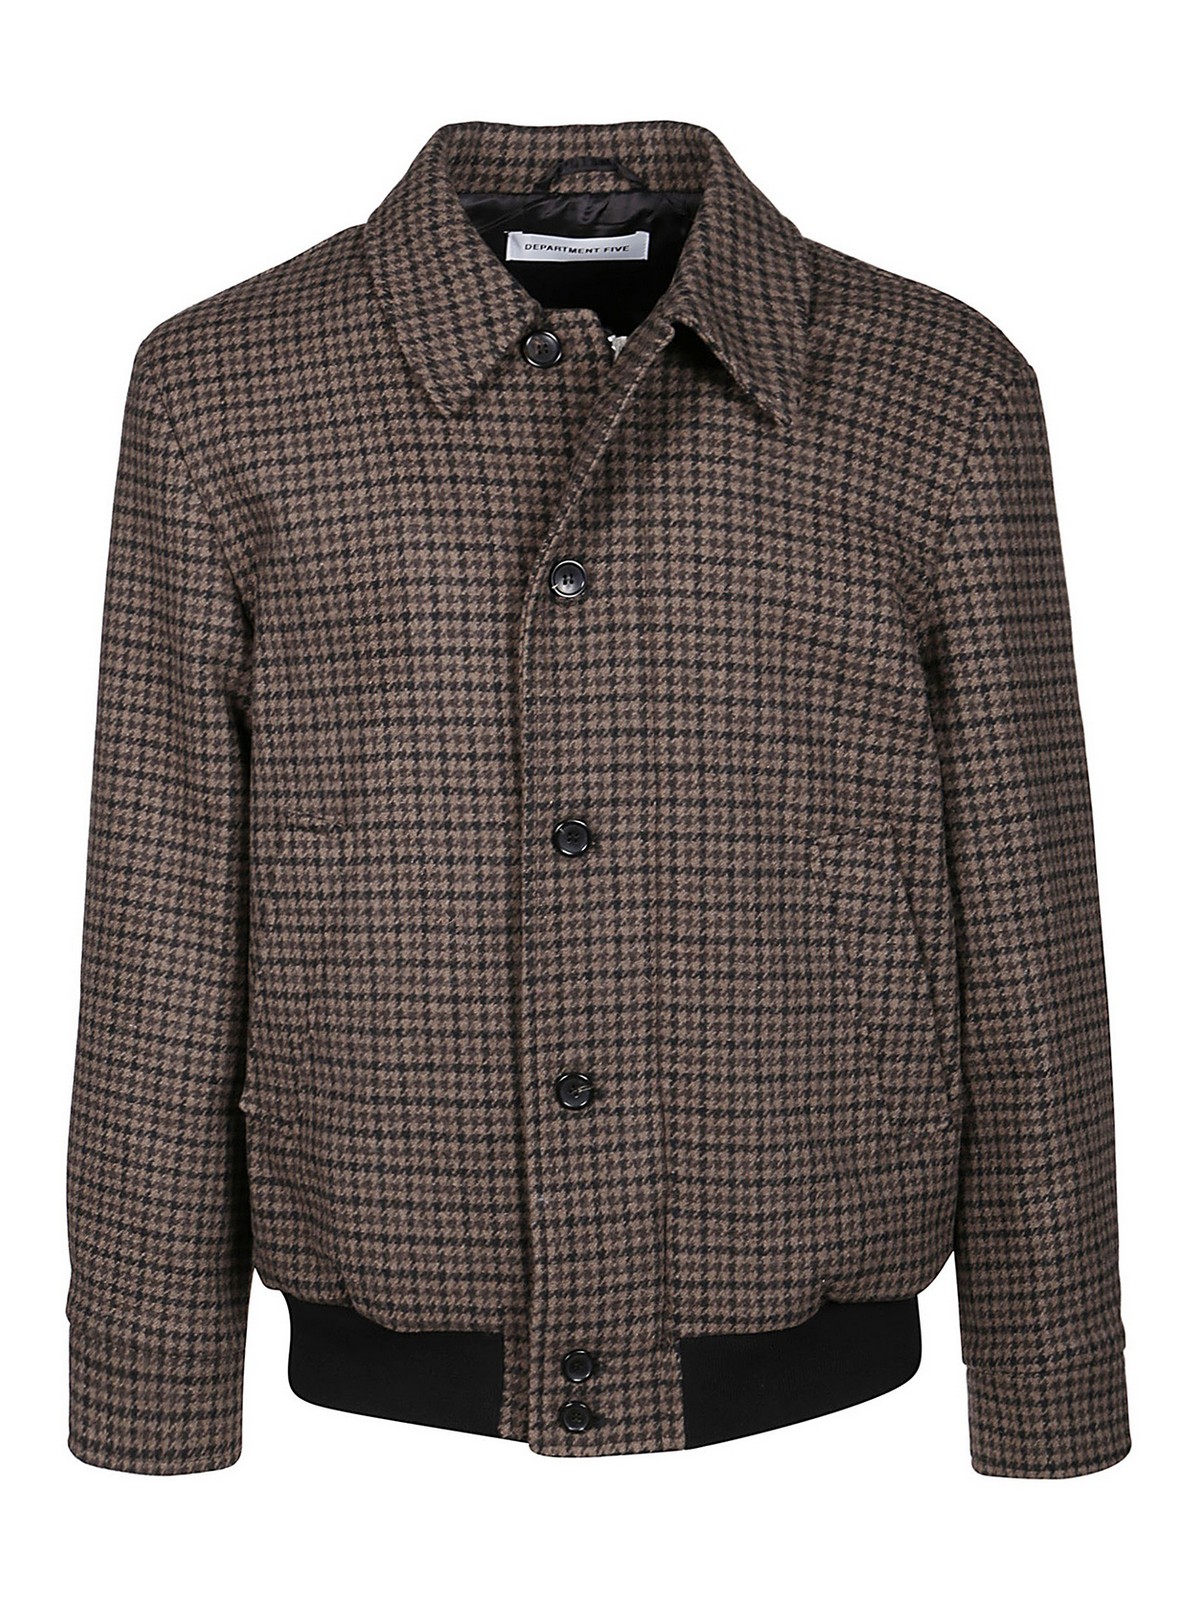 Casual jackets Department 5 - Houndstooth jacket - U21G08F2107VE